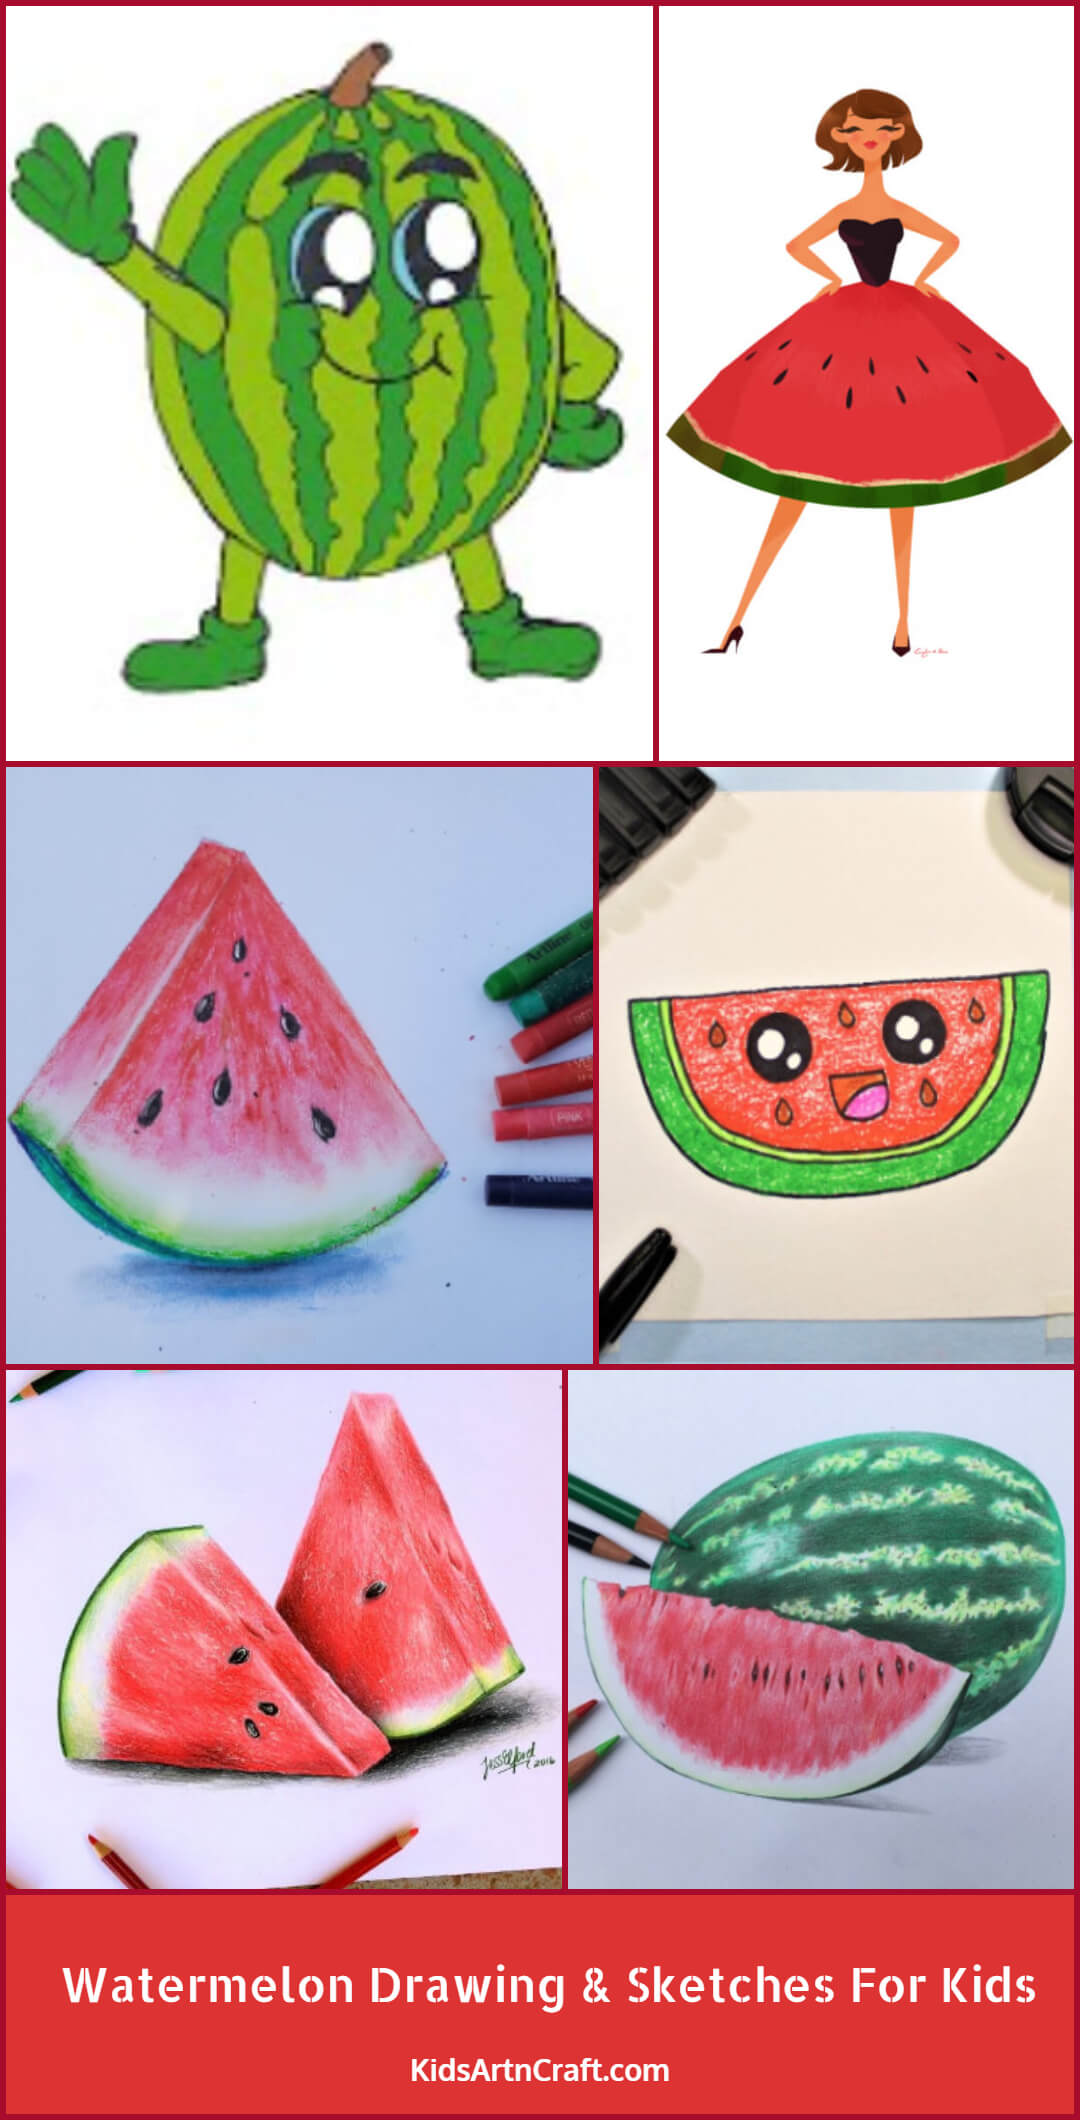 Watermelon Drawing & Sketches For Kids